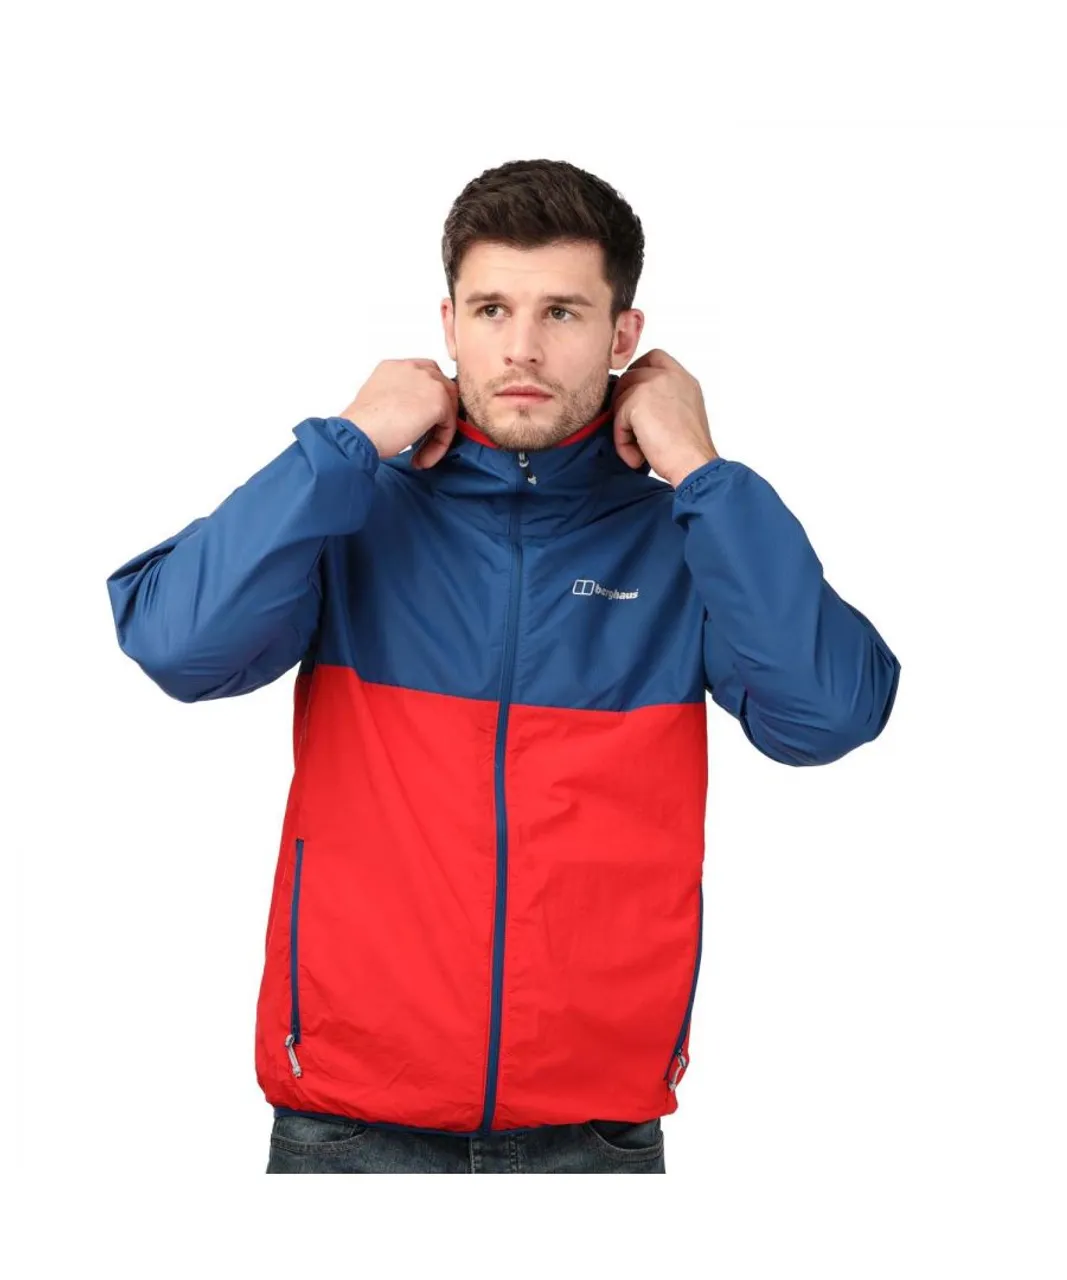 Berghaus Mens Corbeck Windproof Jacket in Blue red - Blue & Red